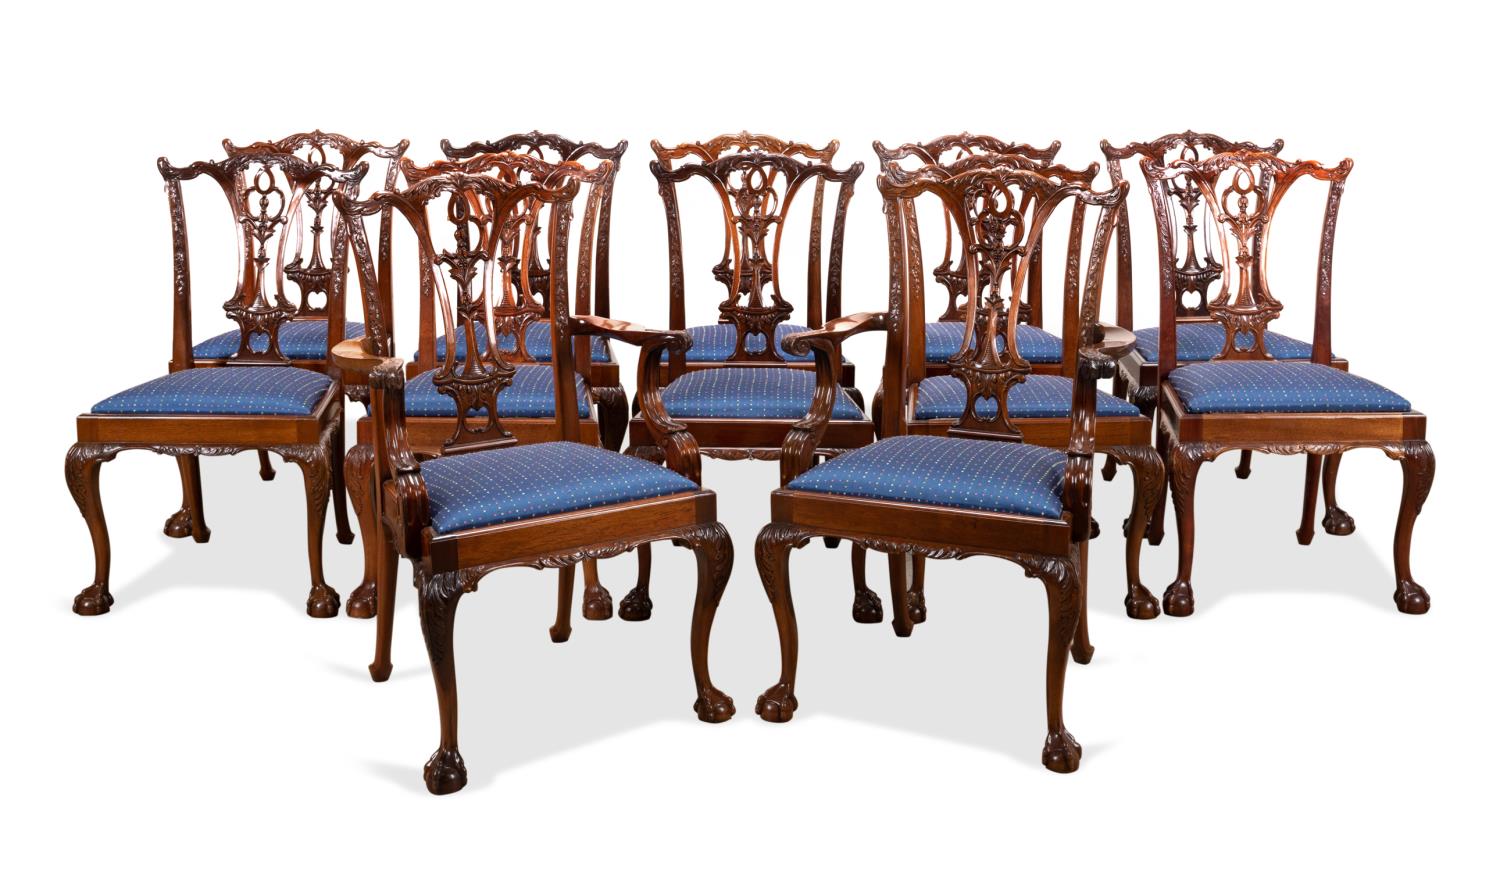 12 CHIPPENDALE STYLE MAHOGANY DINING